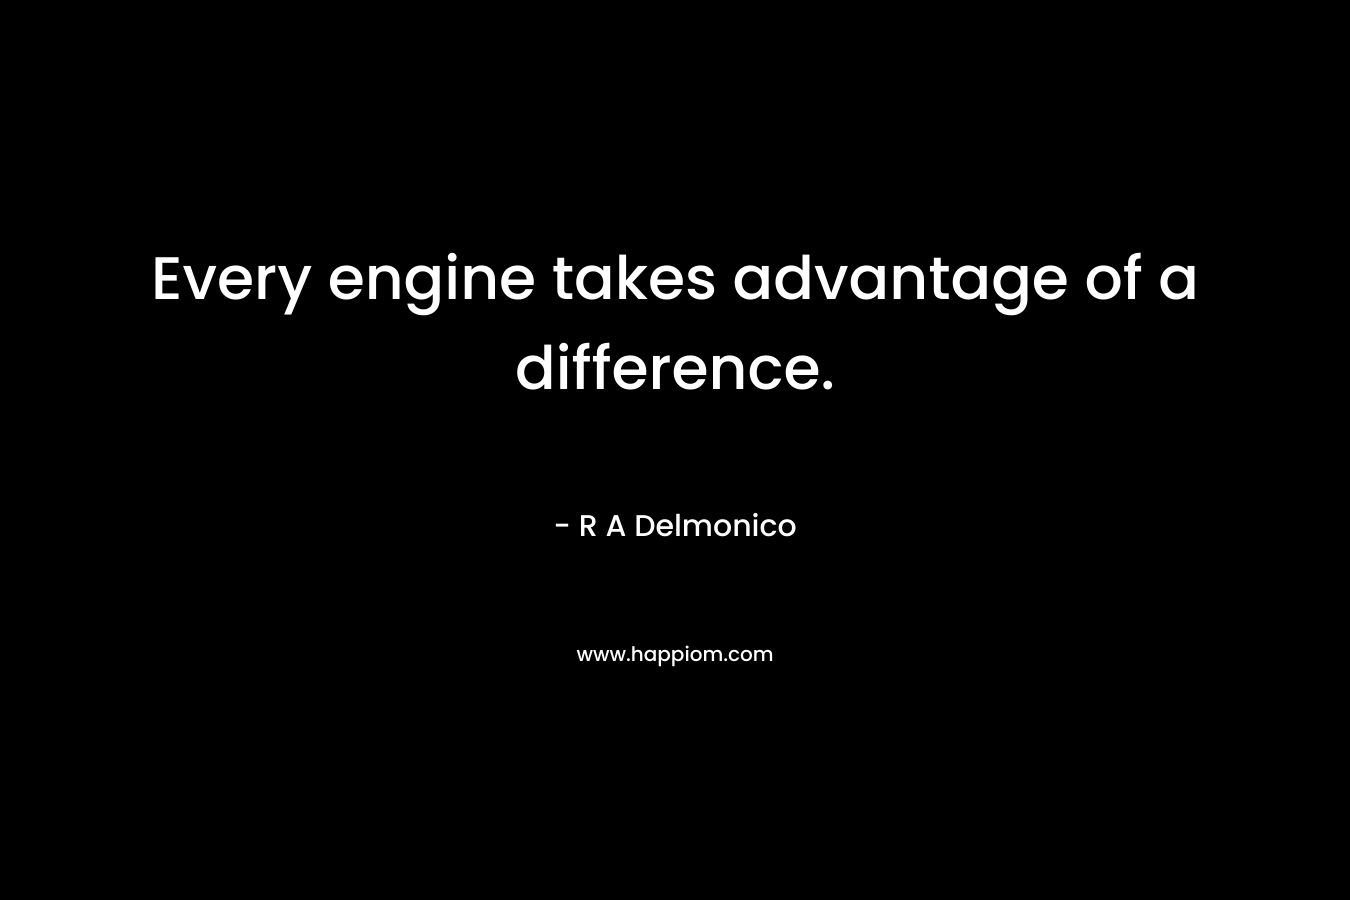 Every engine takes advantage of a difference. – R A Delmonico